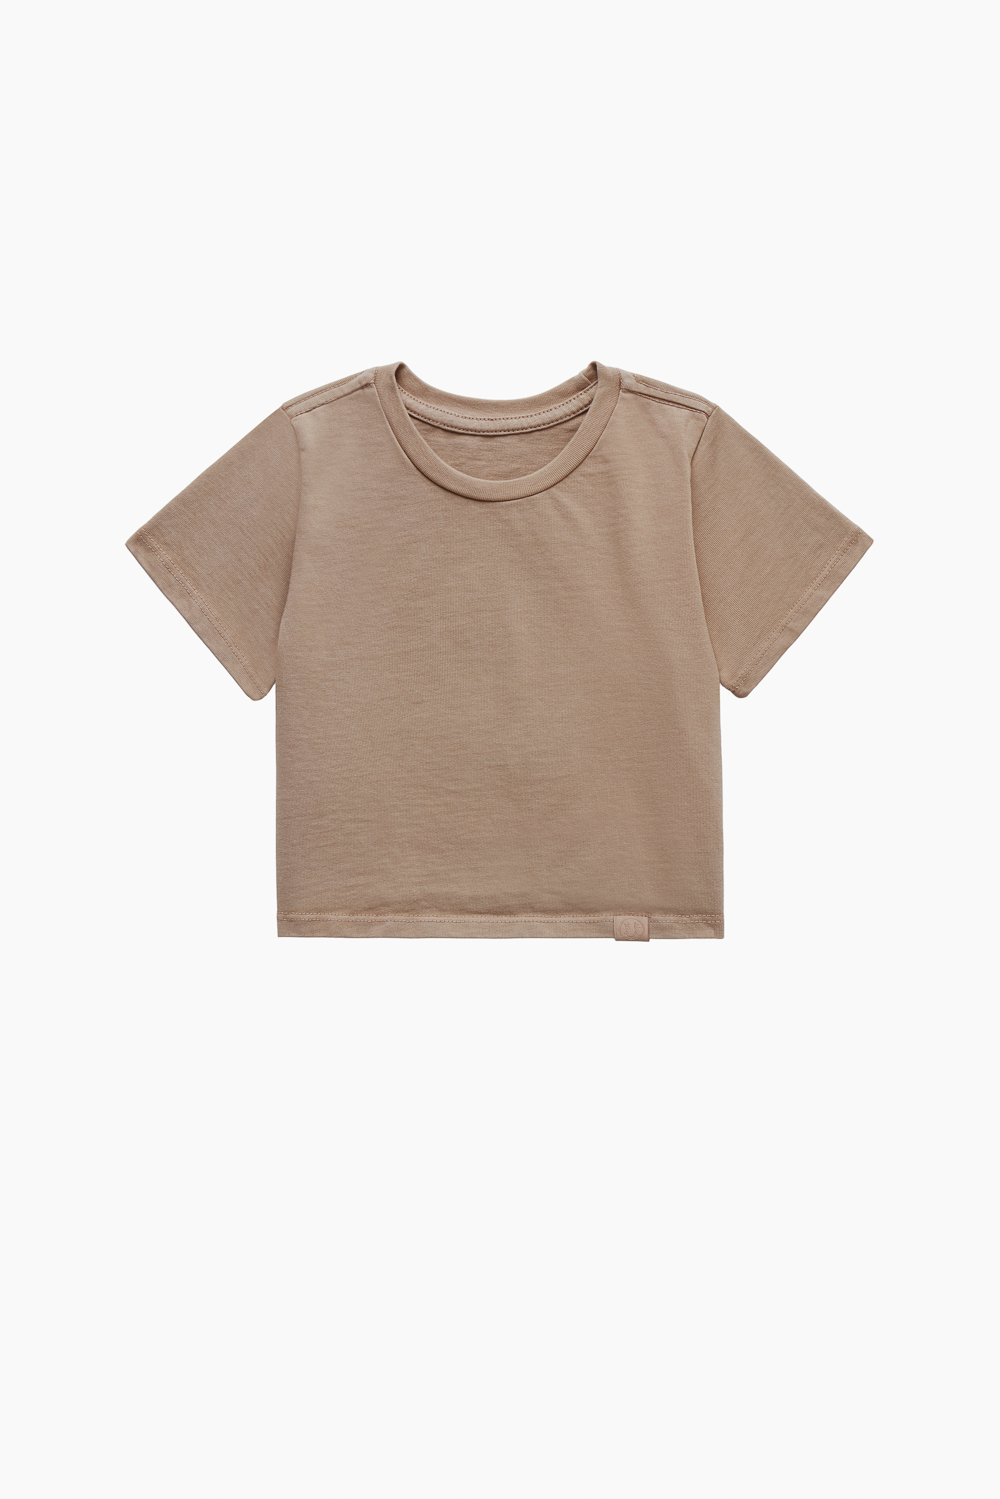 HEAVY COTTON KIDS EVERYDAY TEE - MAPLE Featured Image